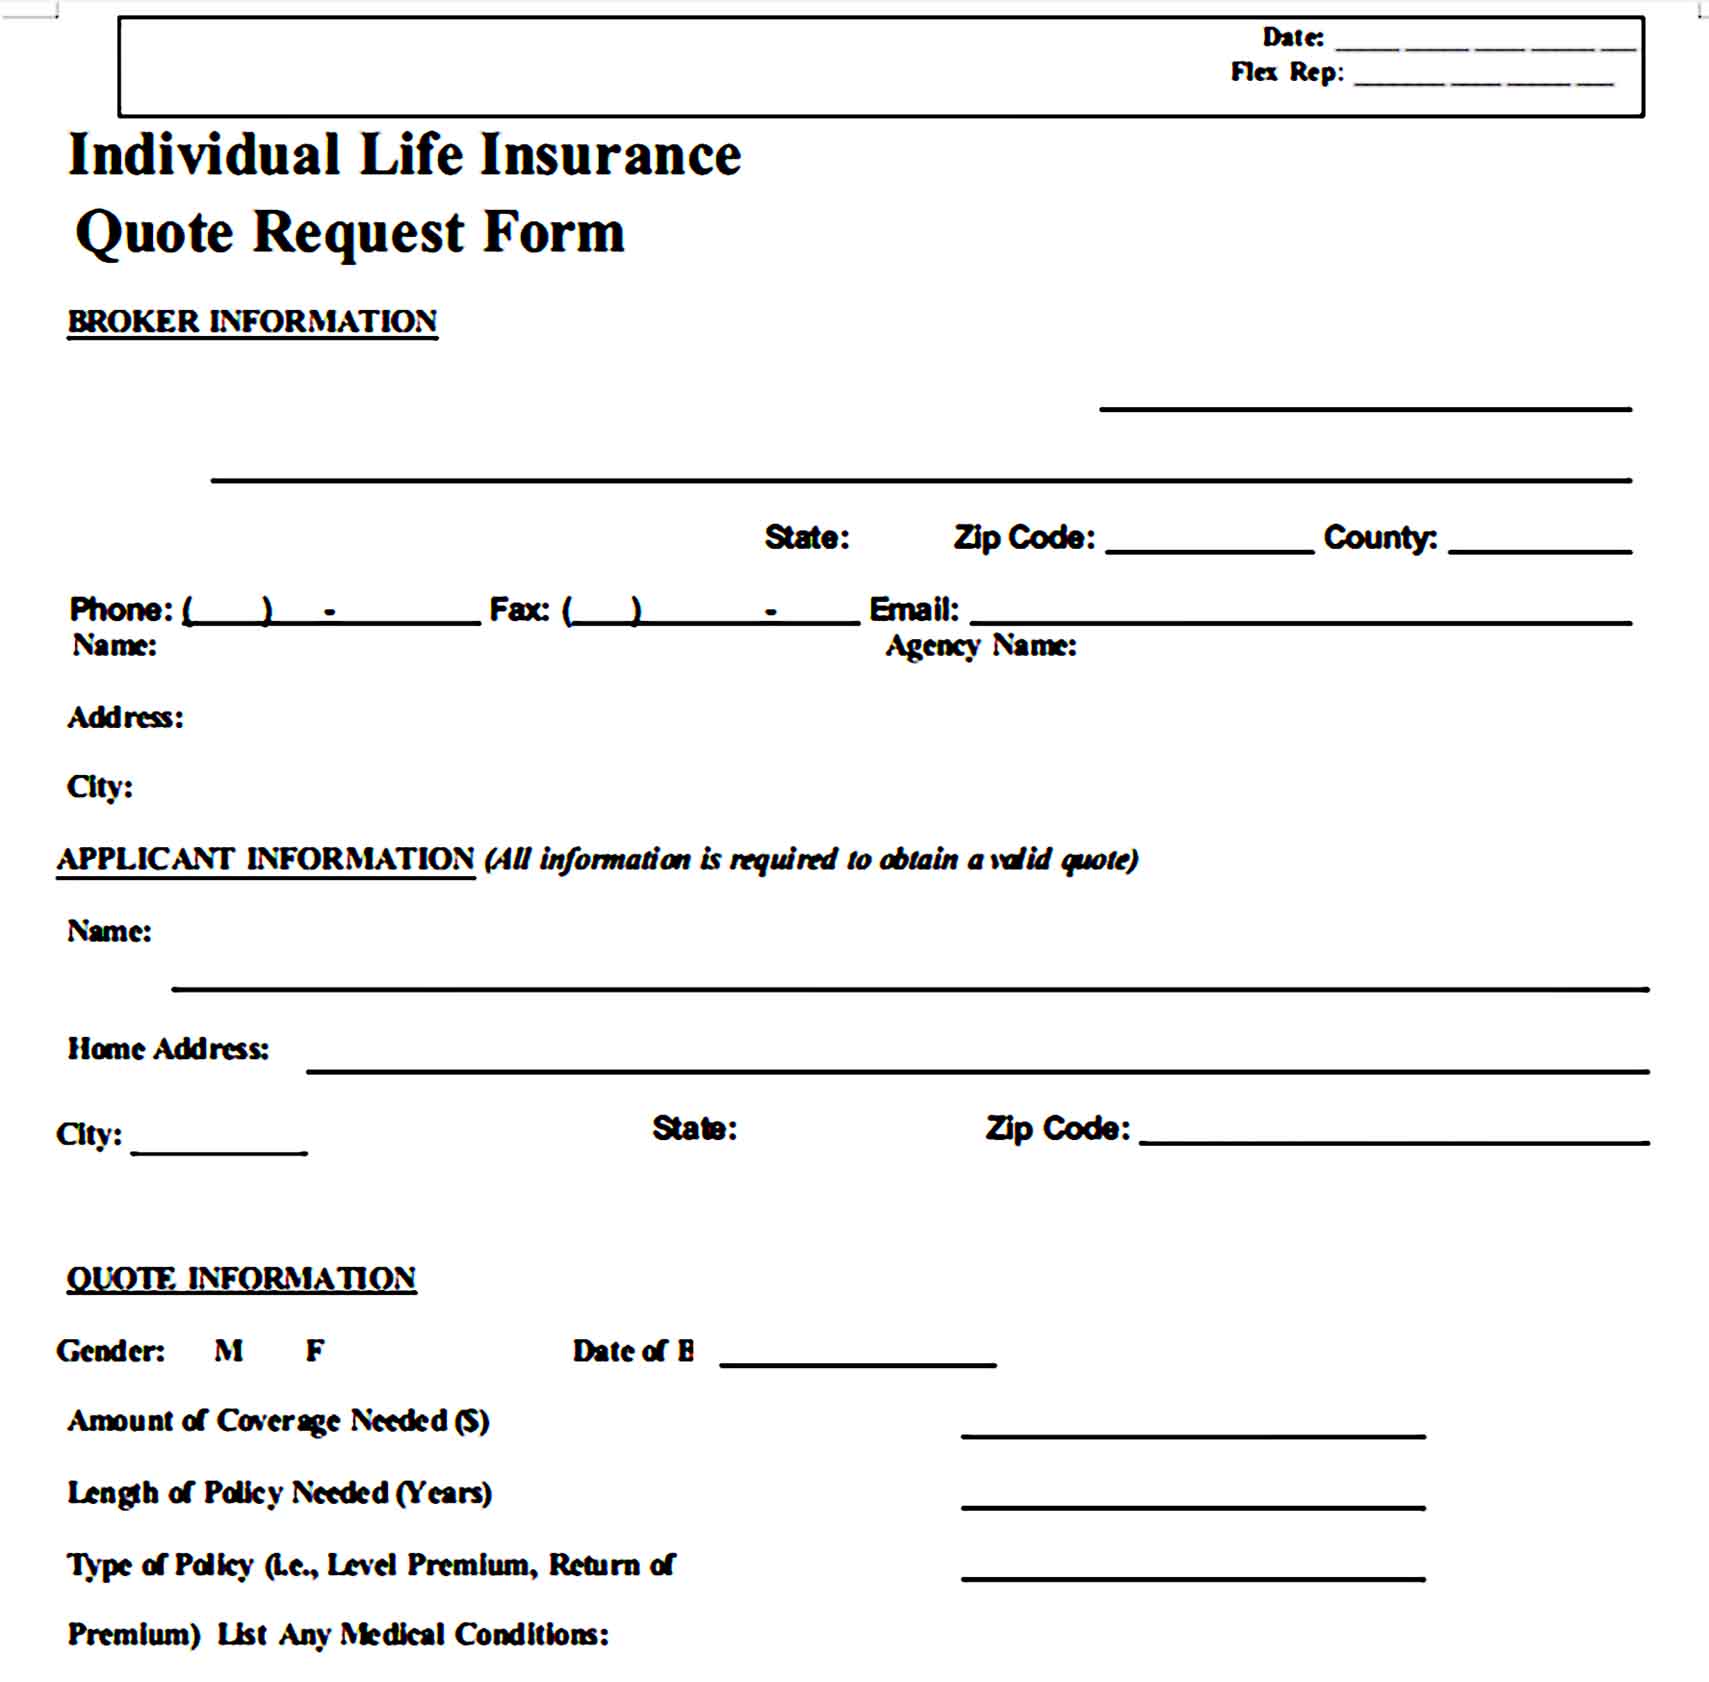 Individual Life Insurance Quote Request Form